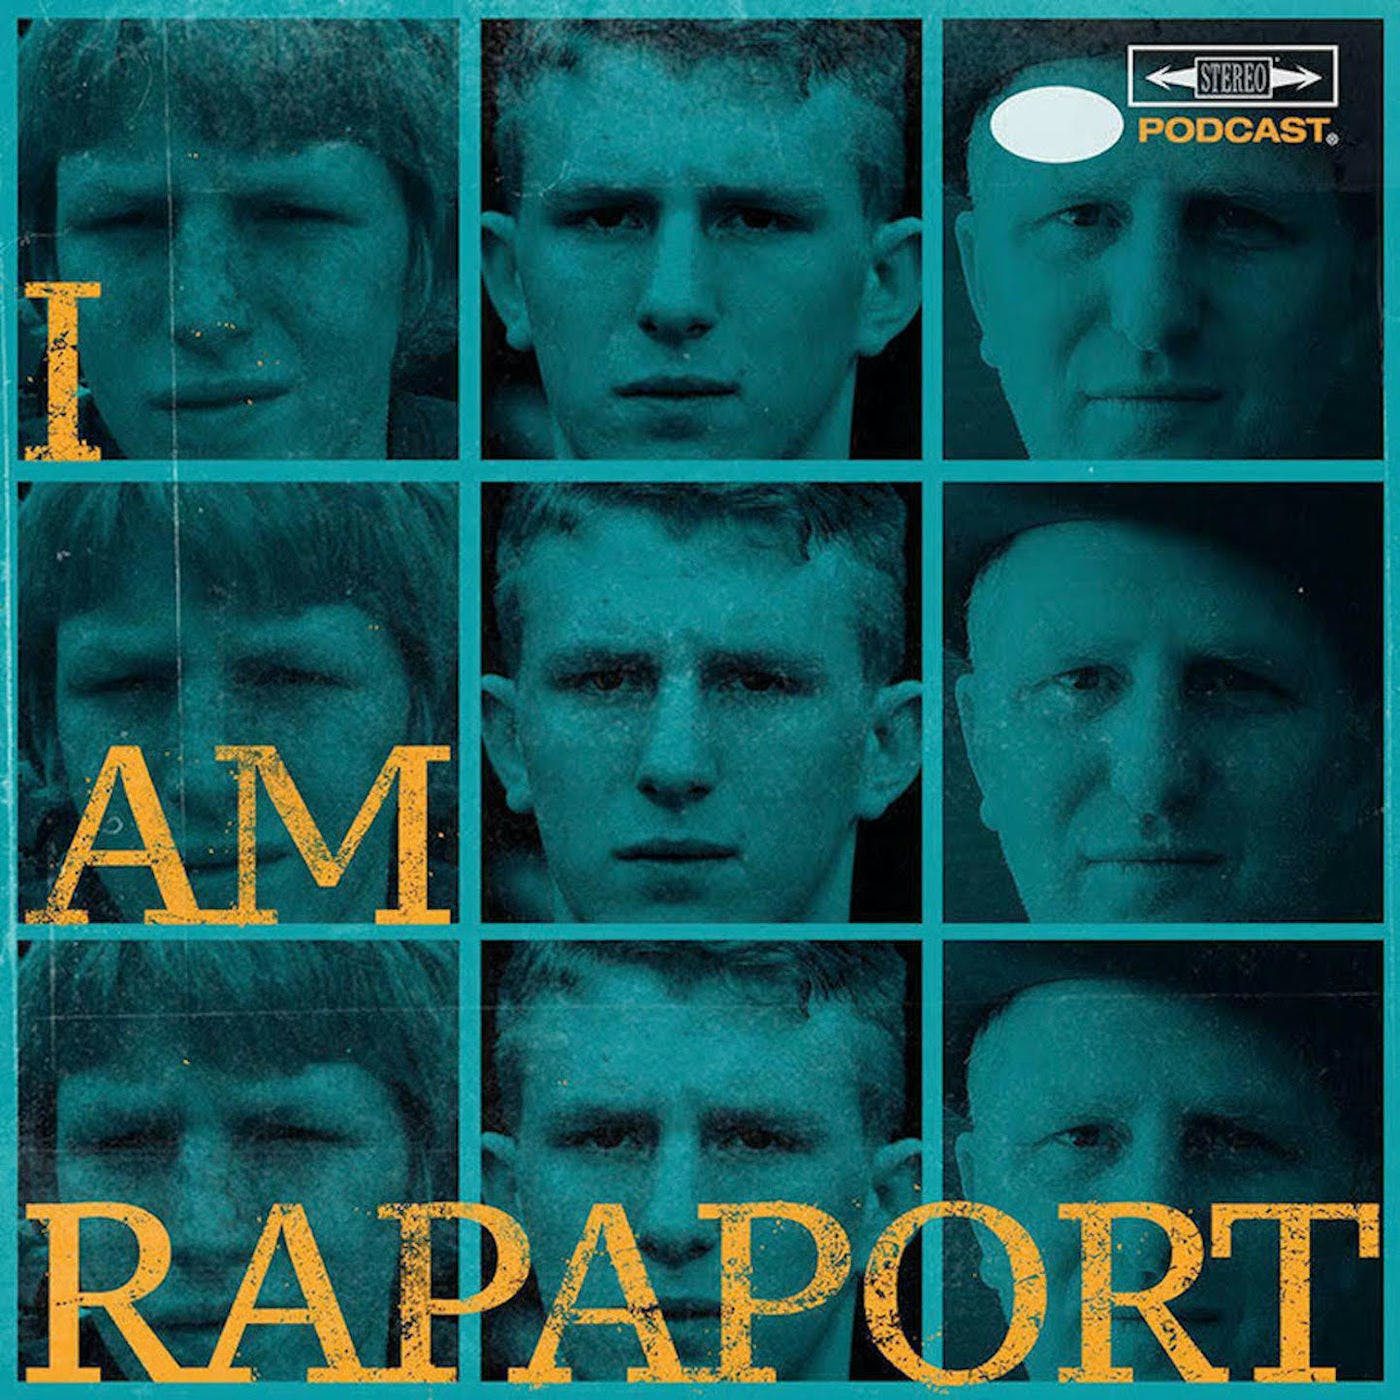 EMERGENCY EP 224 - THE WORST OF DONALD TRUMP aka A SEA OF ORANGE - AN I AM RAPAPORT: STEREO PODCAST EXCLUSIVE EXTRAVAGANZA